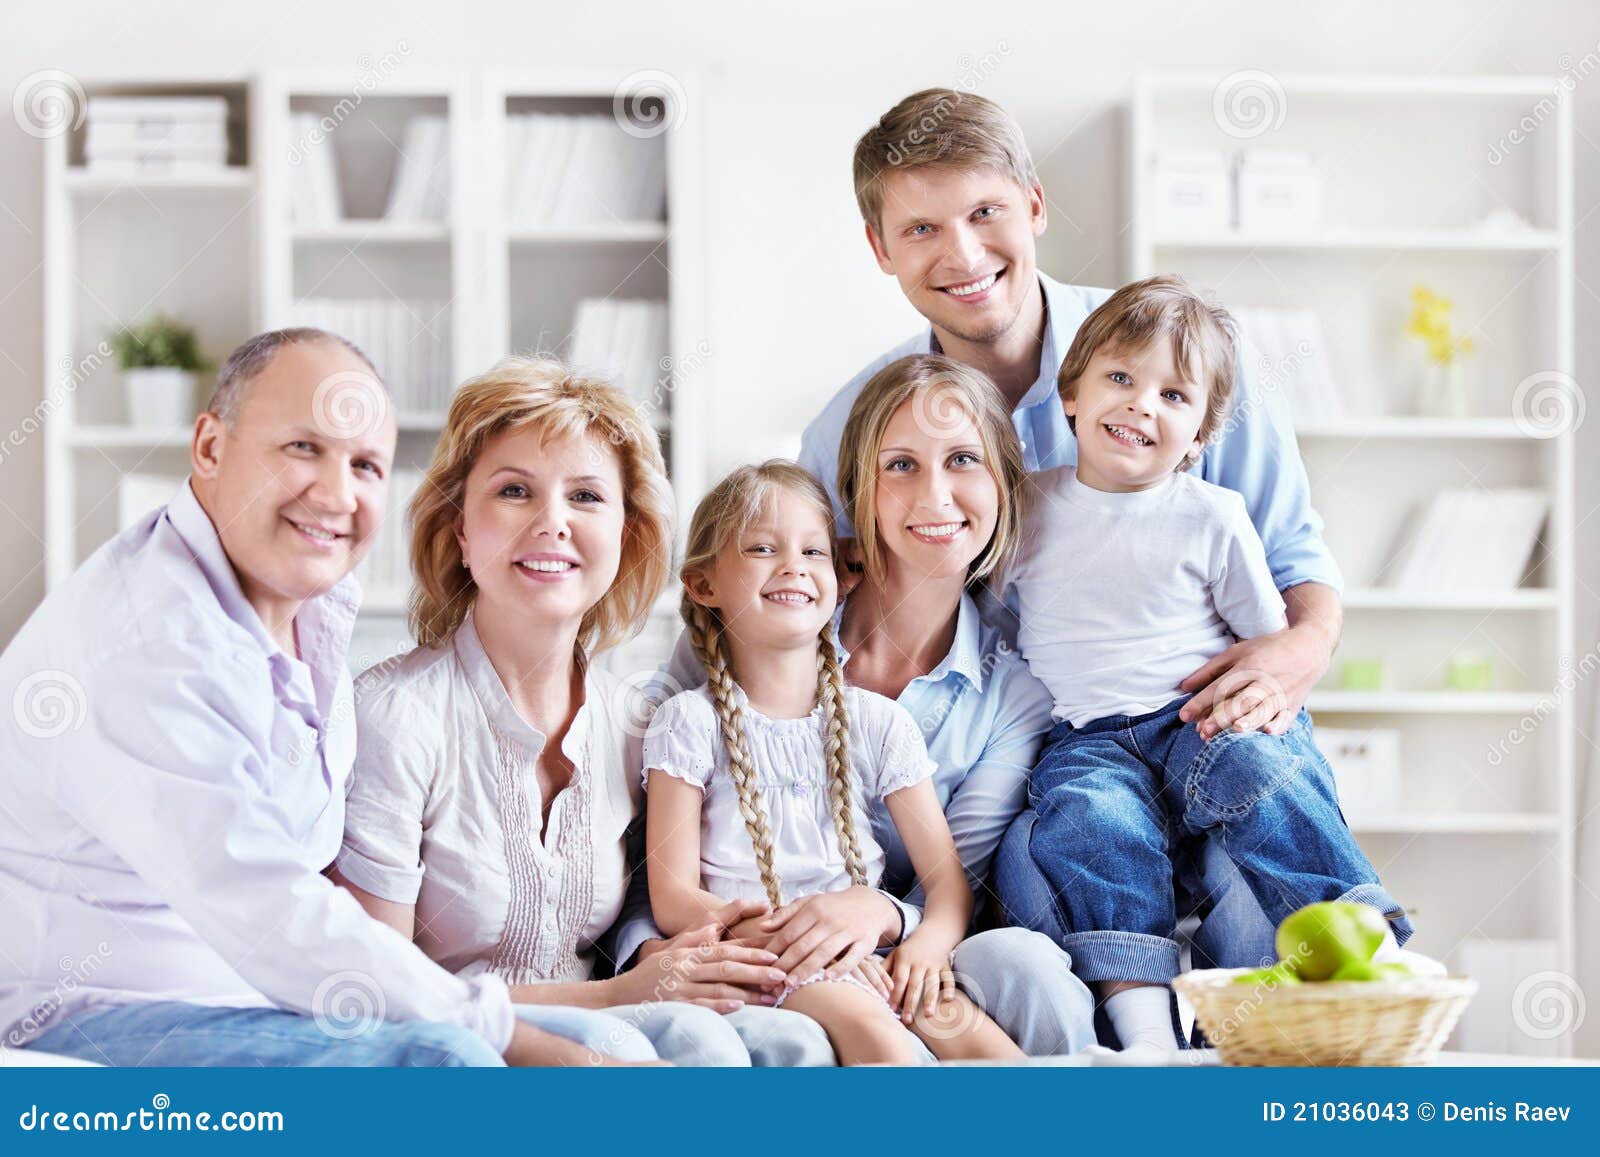 Family At Home Stock Photos Image: 21036043